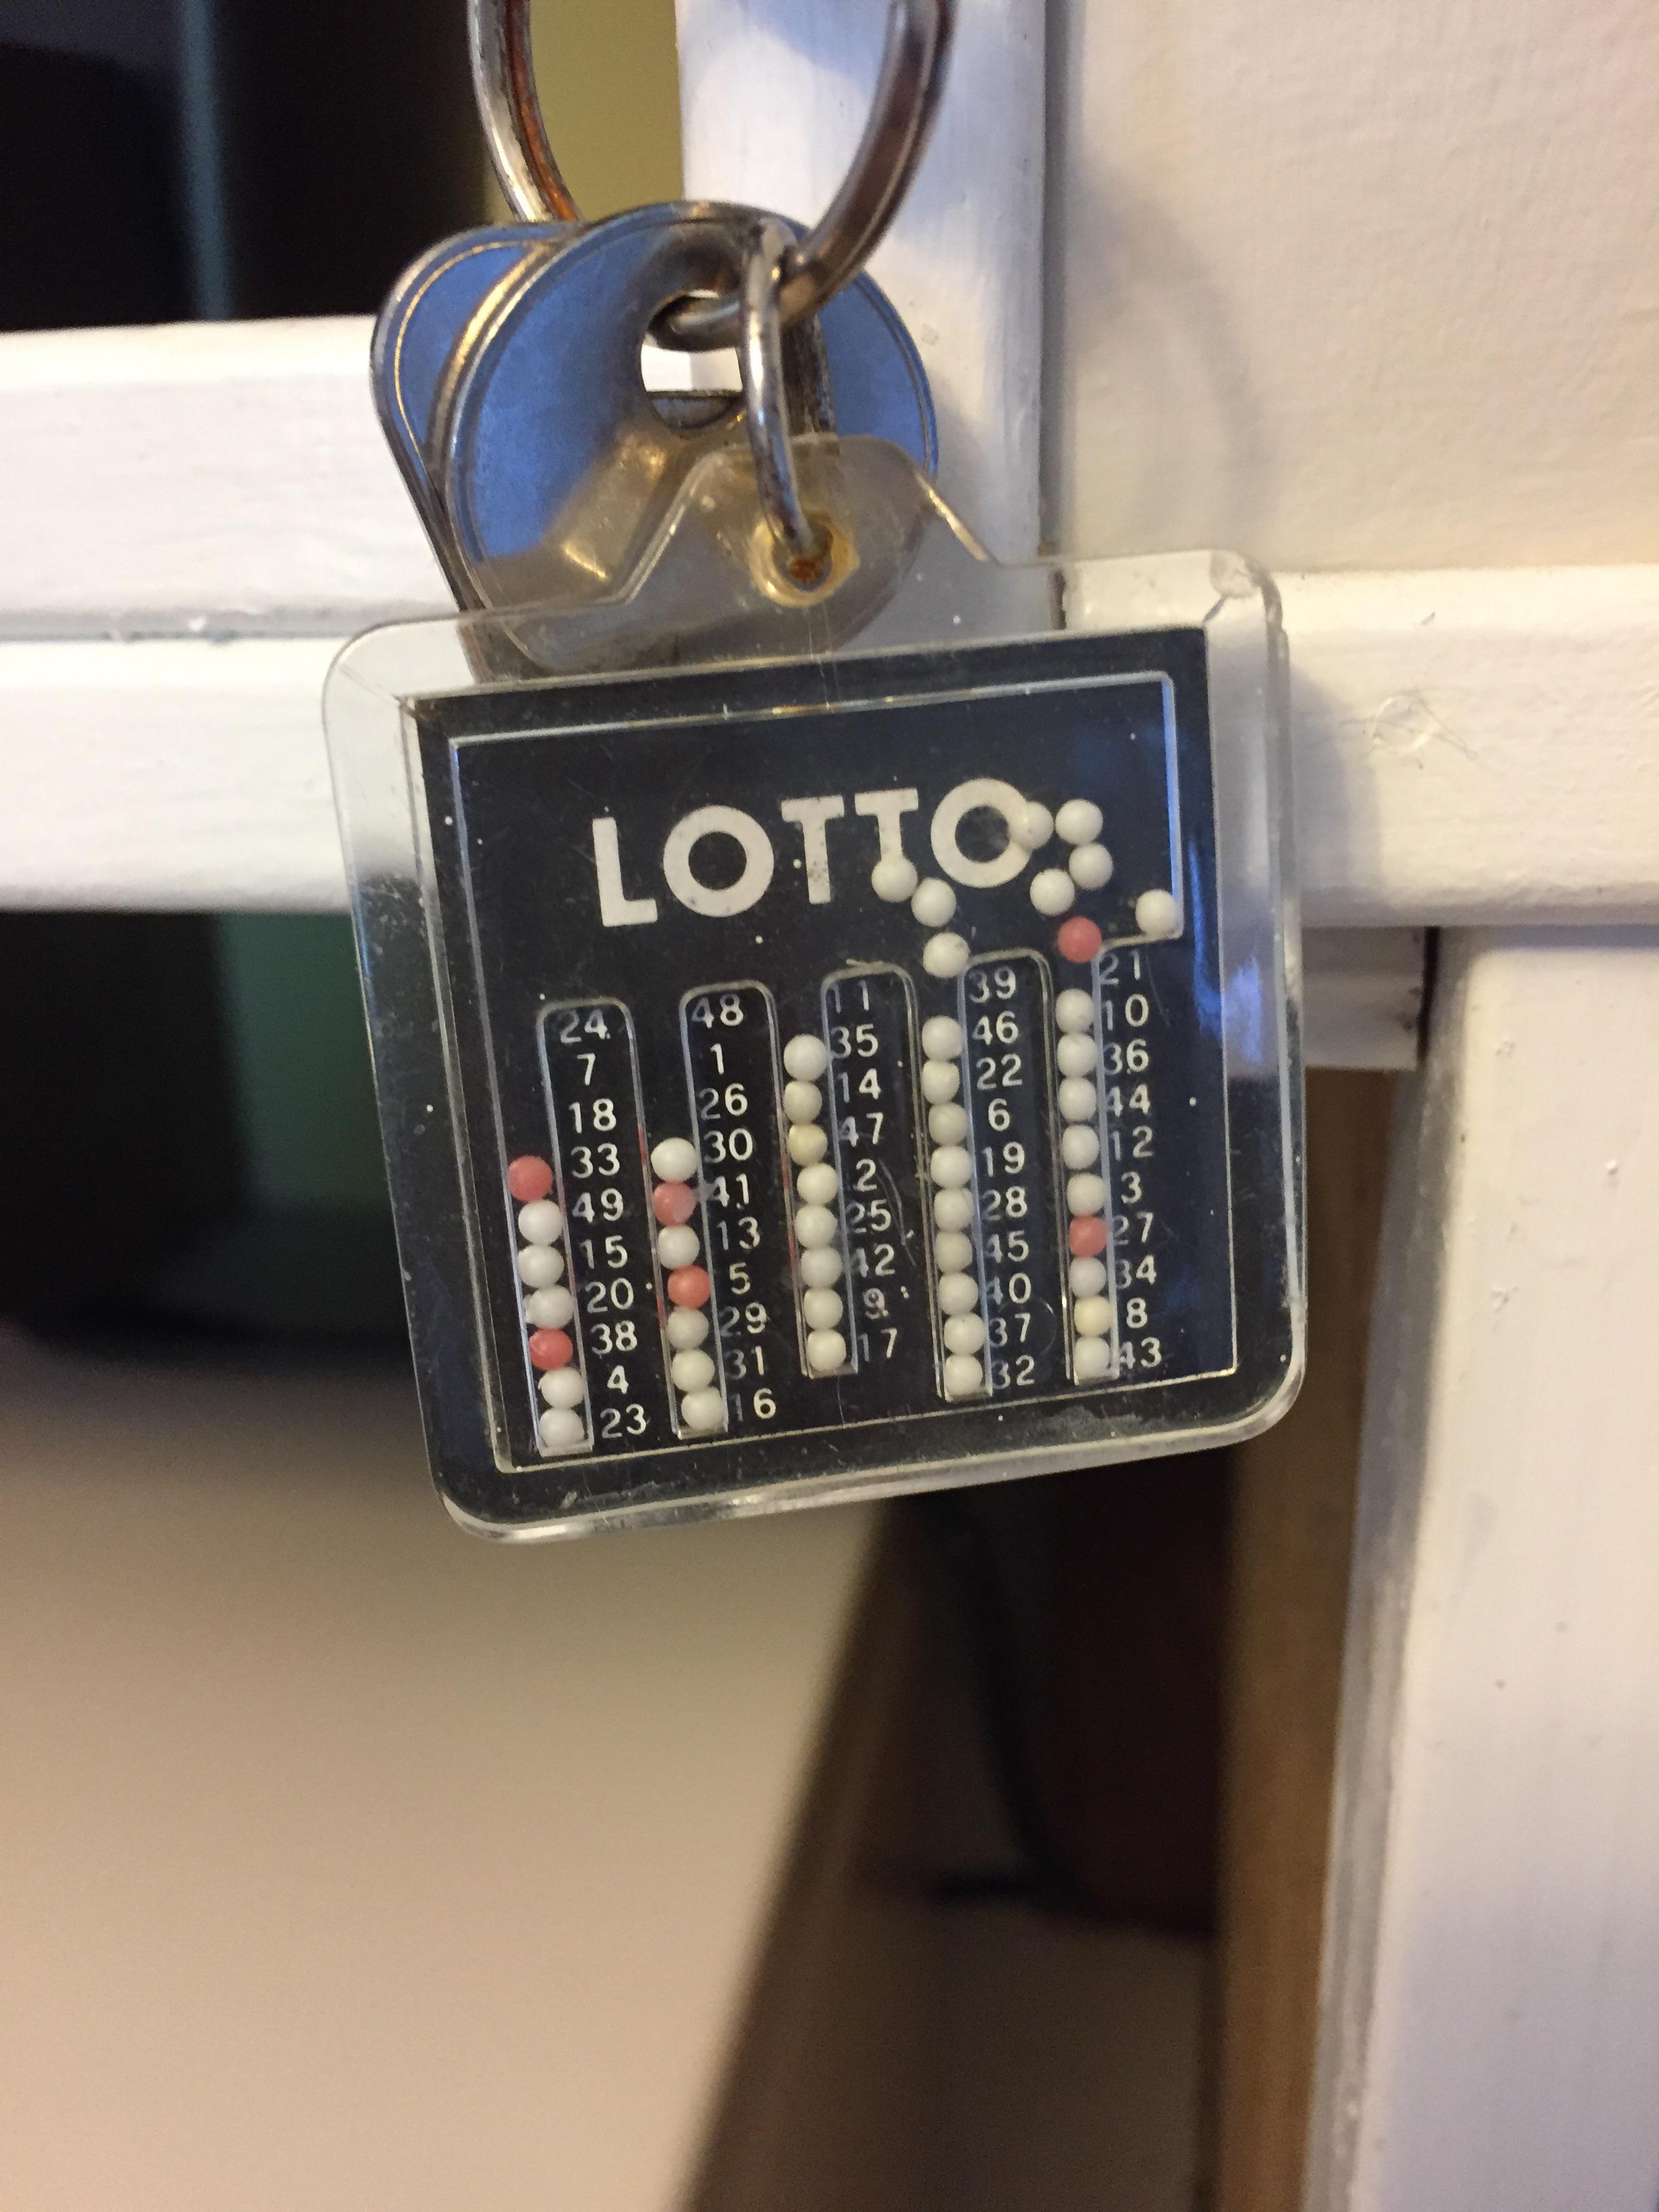 A keychain that chooses your lotto numbers for you...